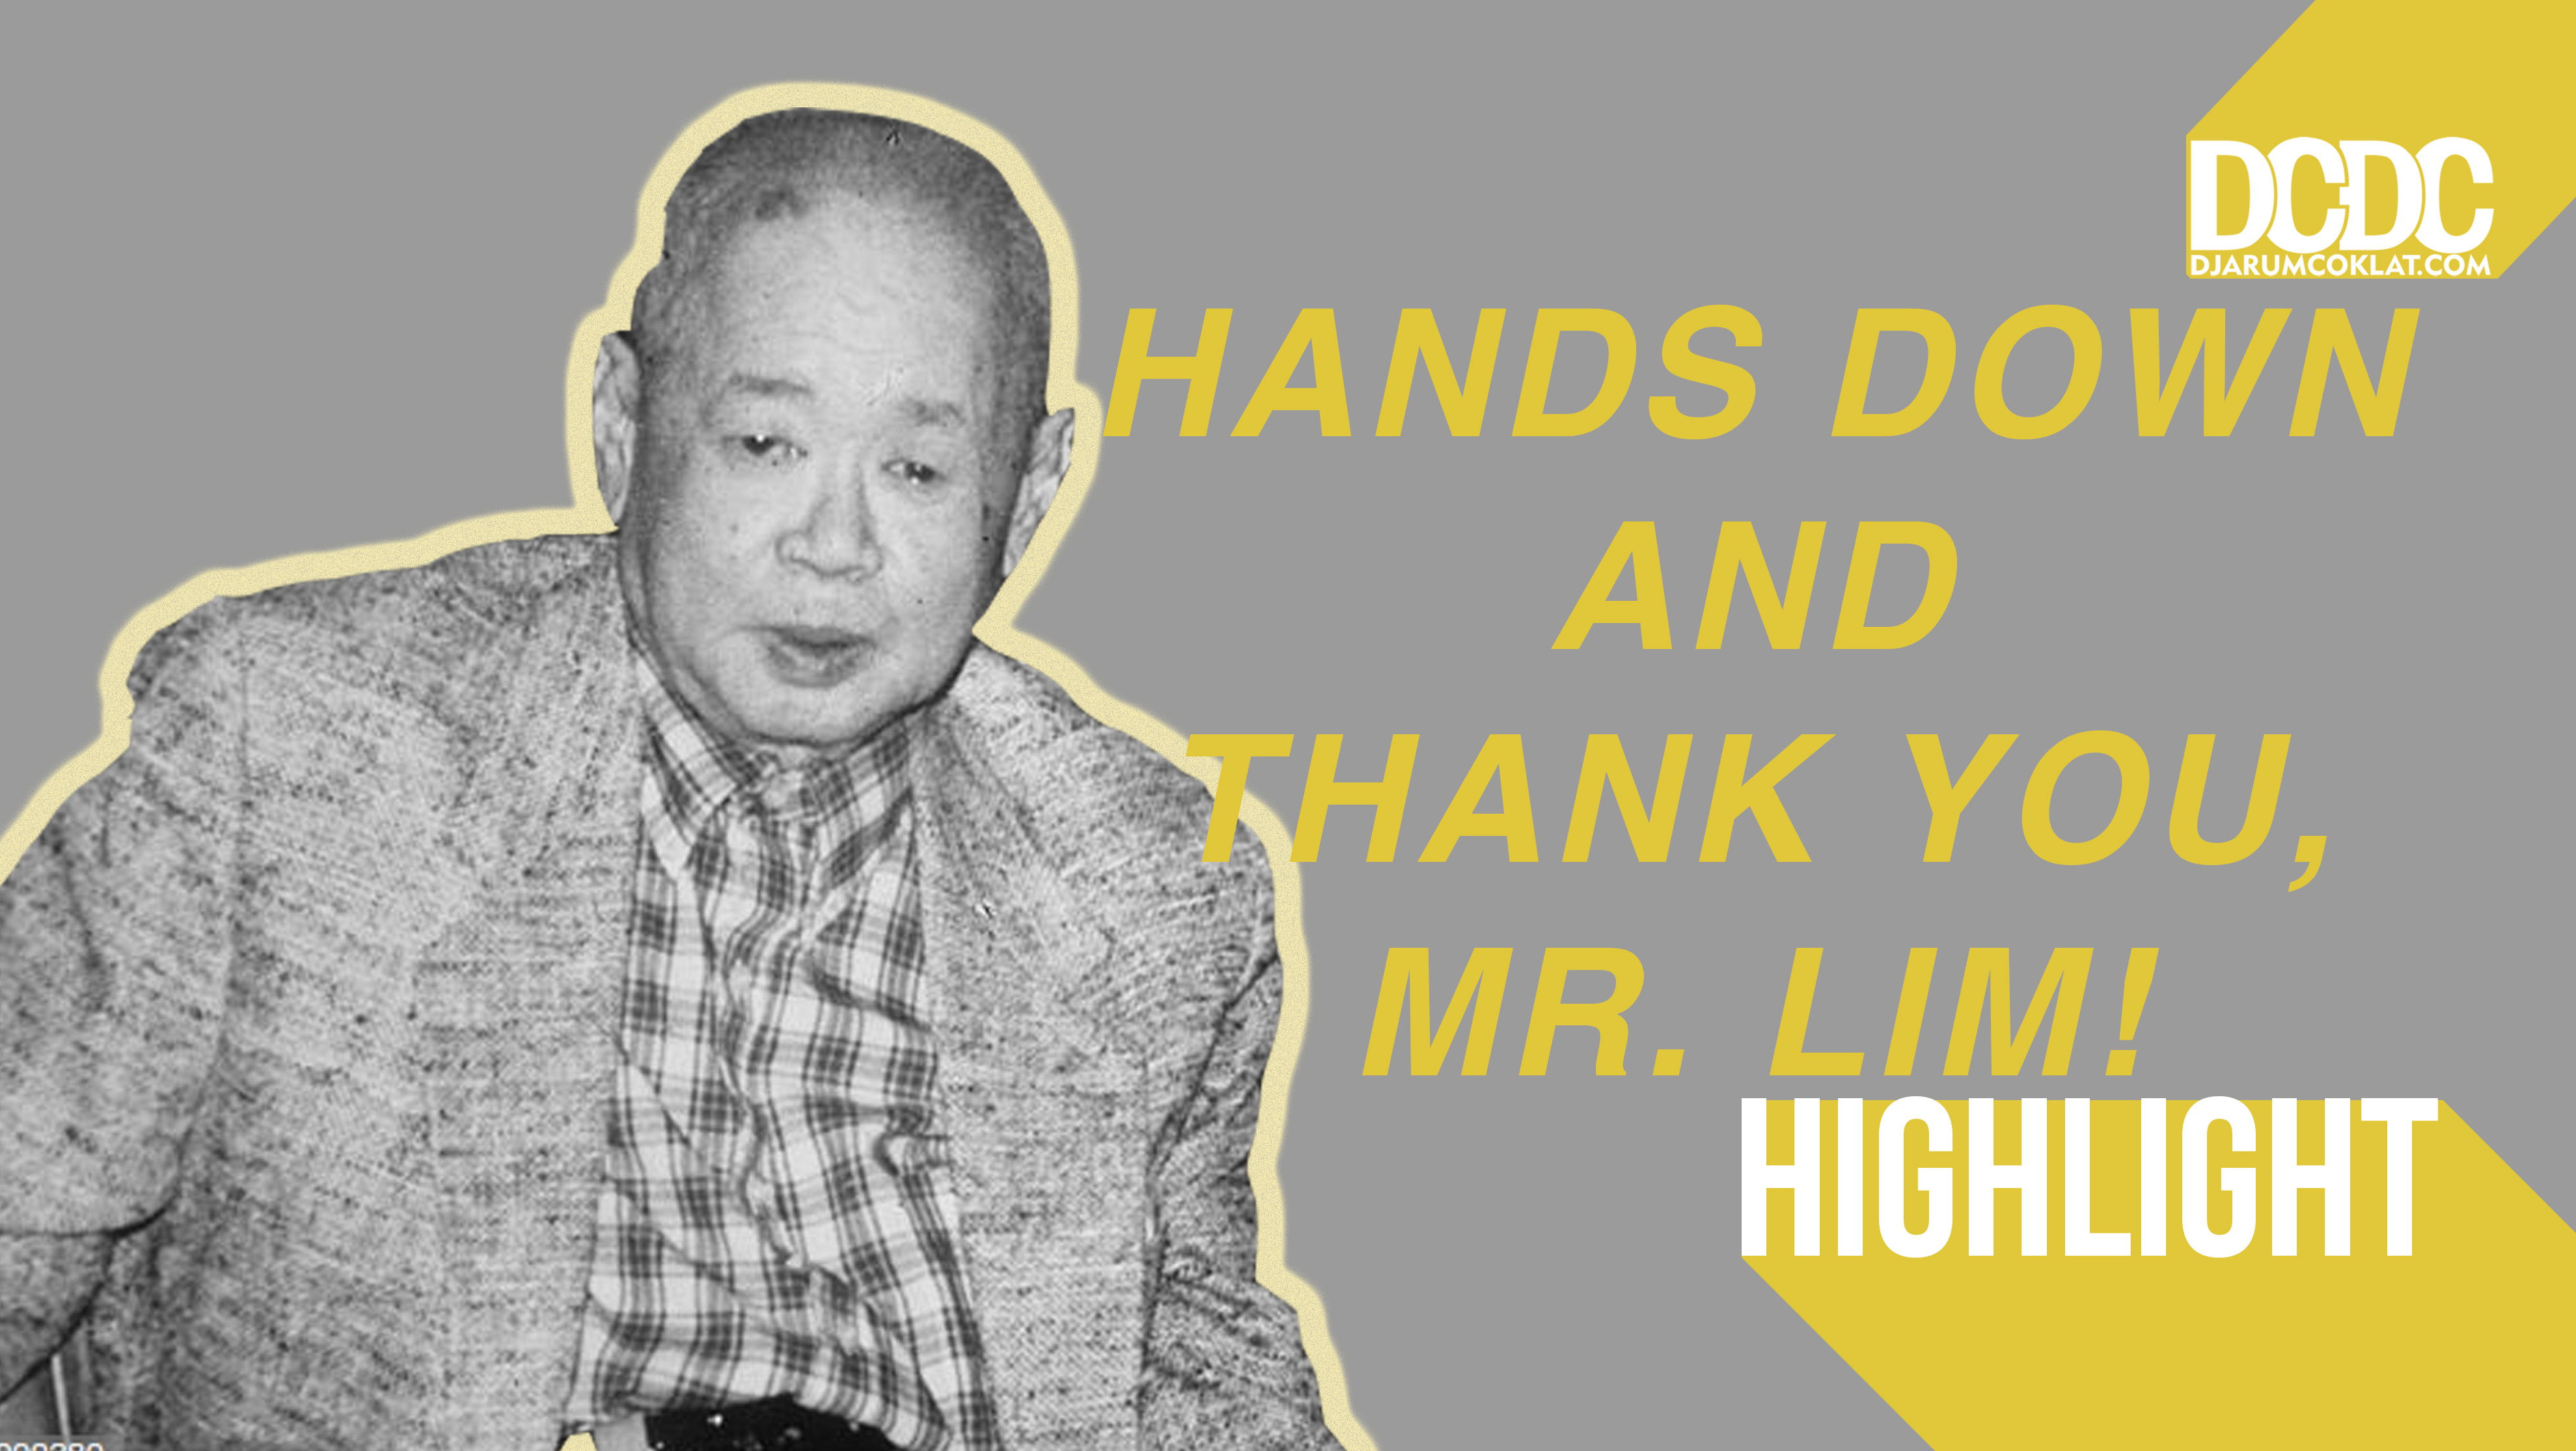 Sang Pelopor, Mr. Harry Lim. Hands Down, and Thank You! (Bagian Lima)